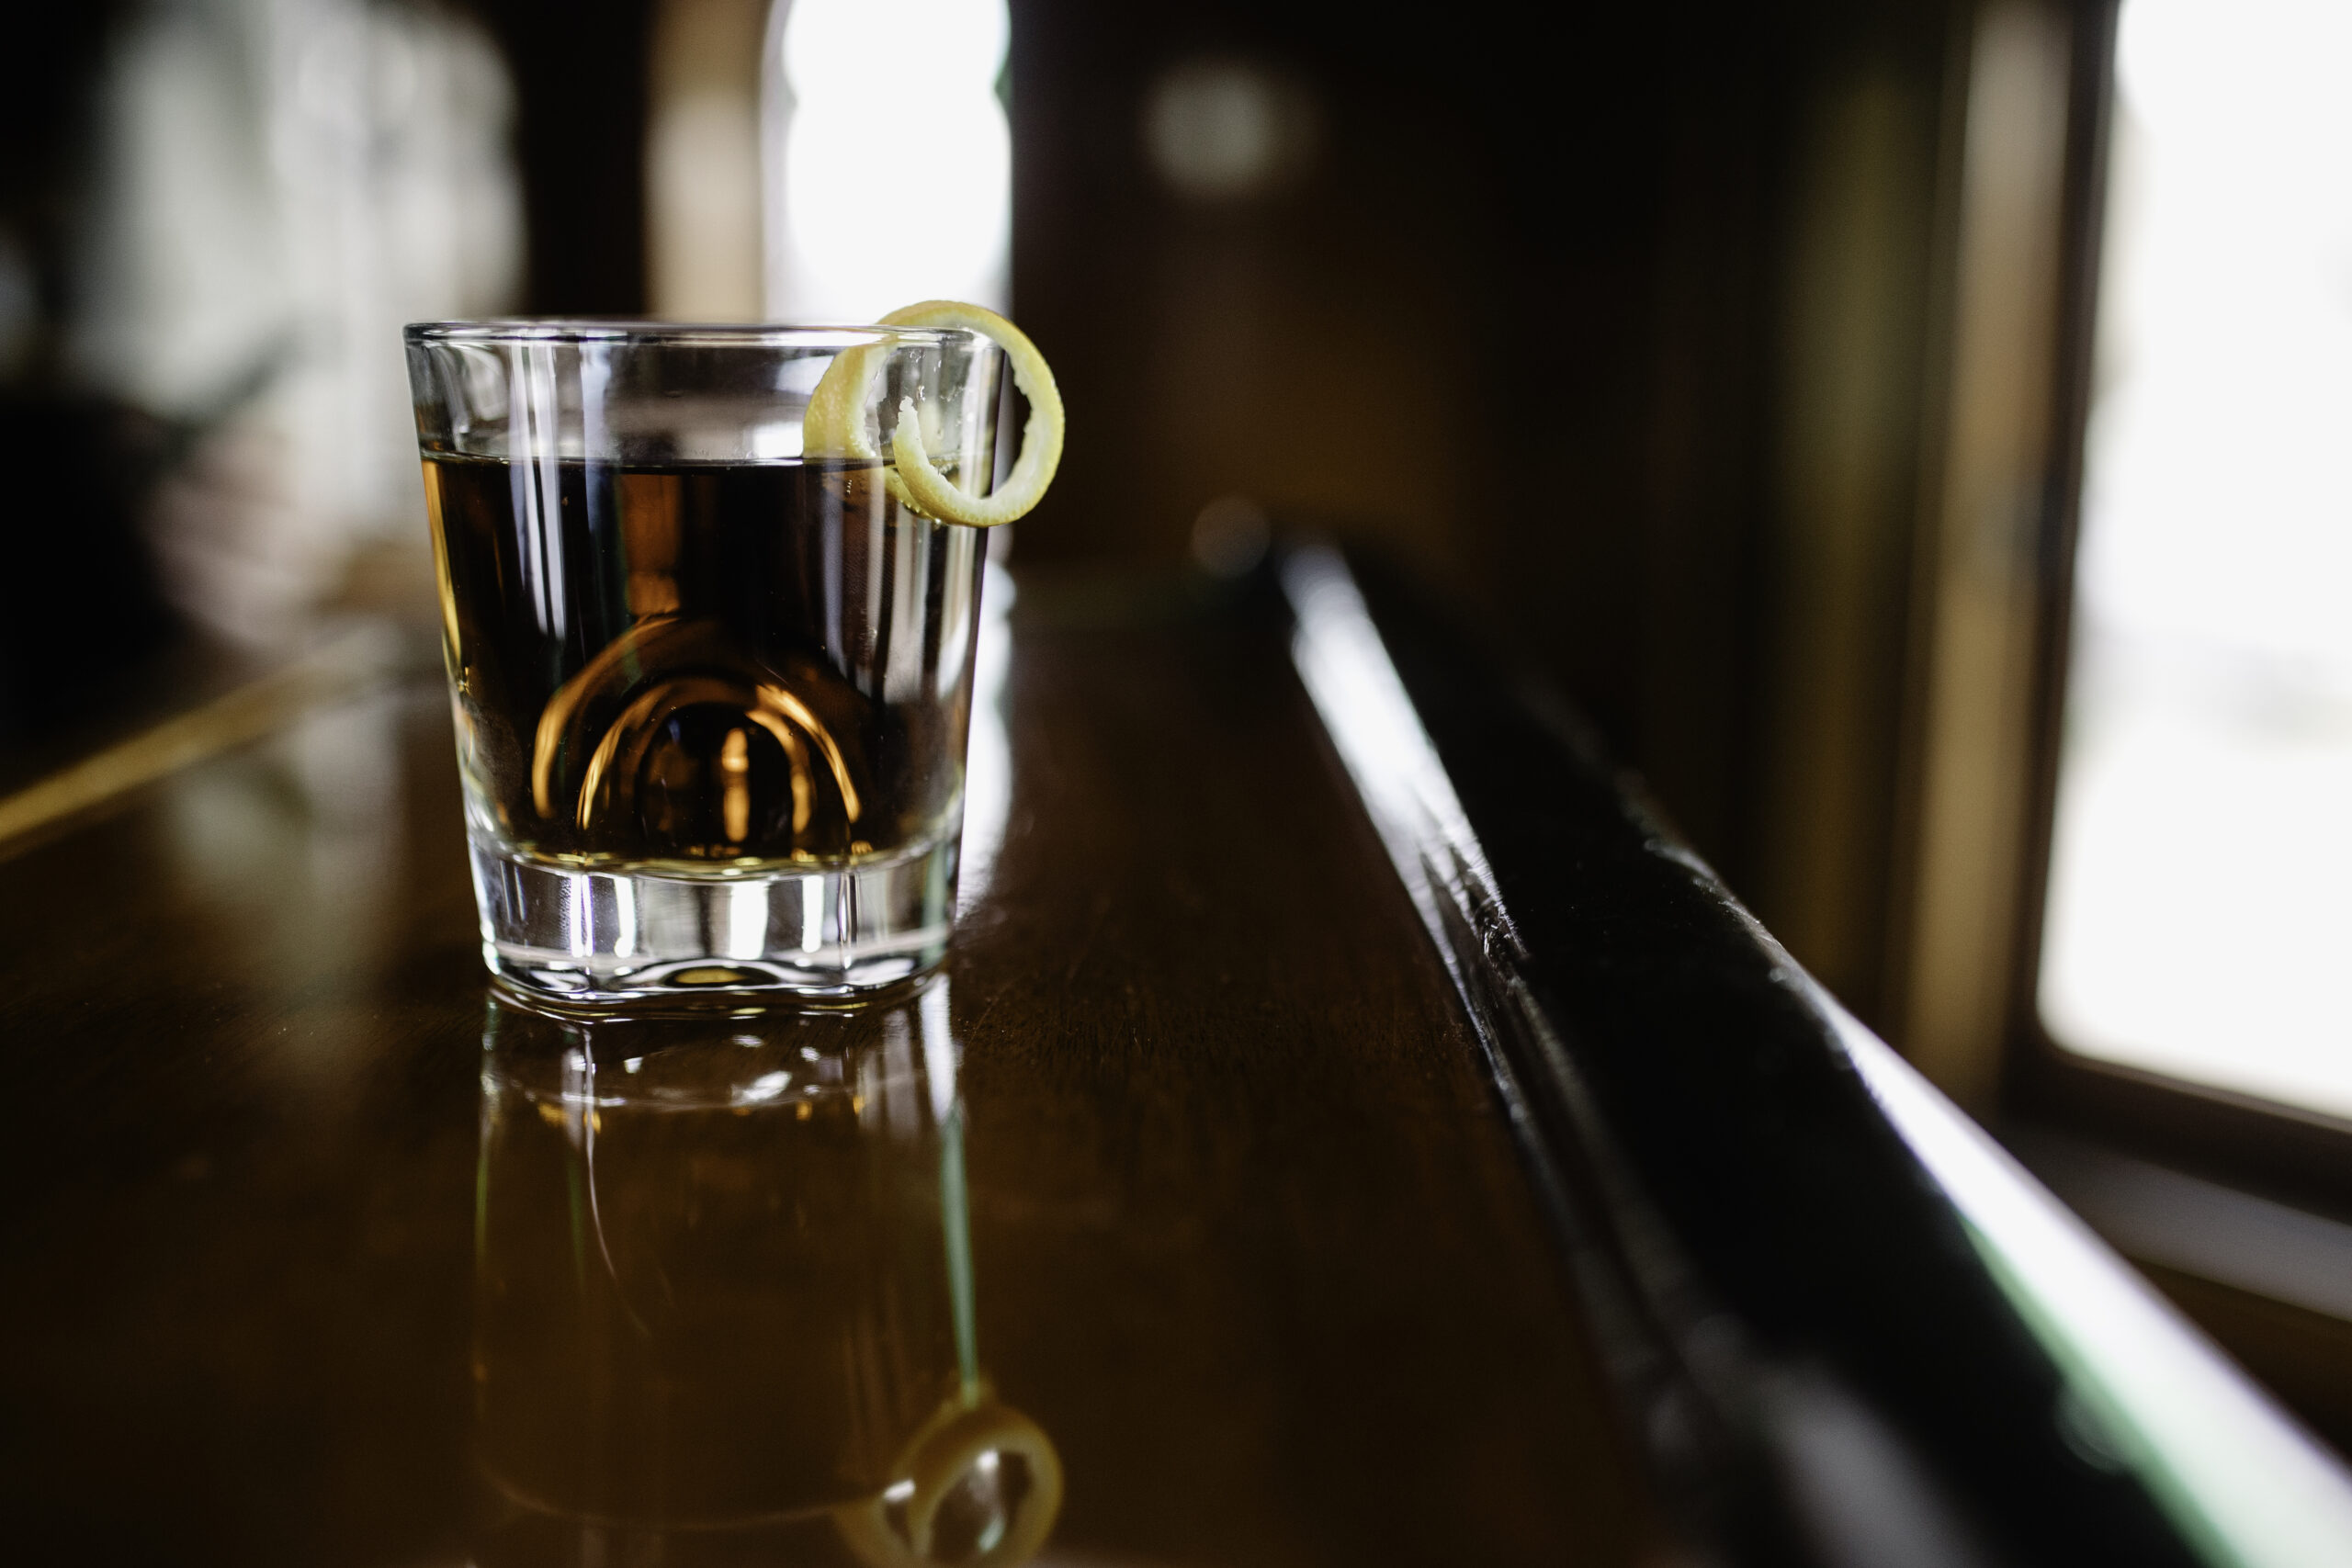 A close-up of a whisky glass on a table.